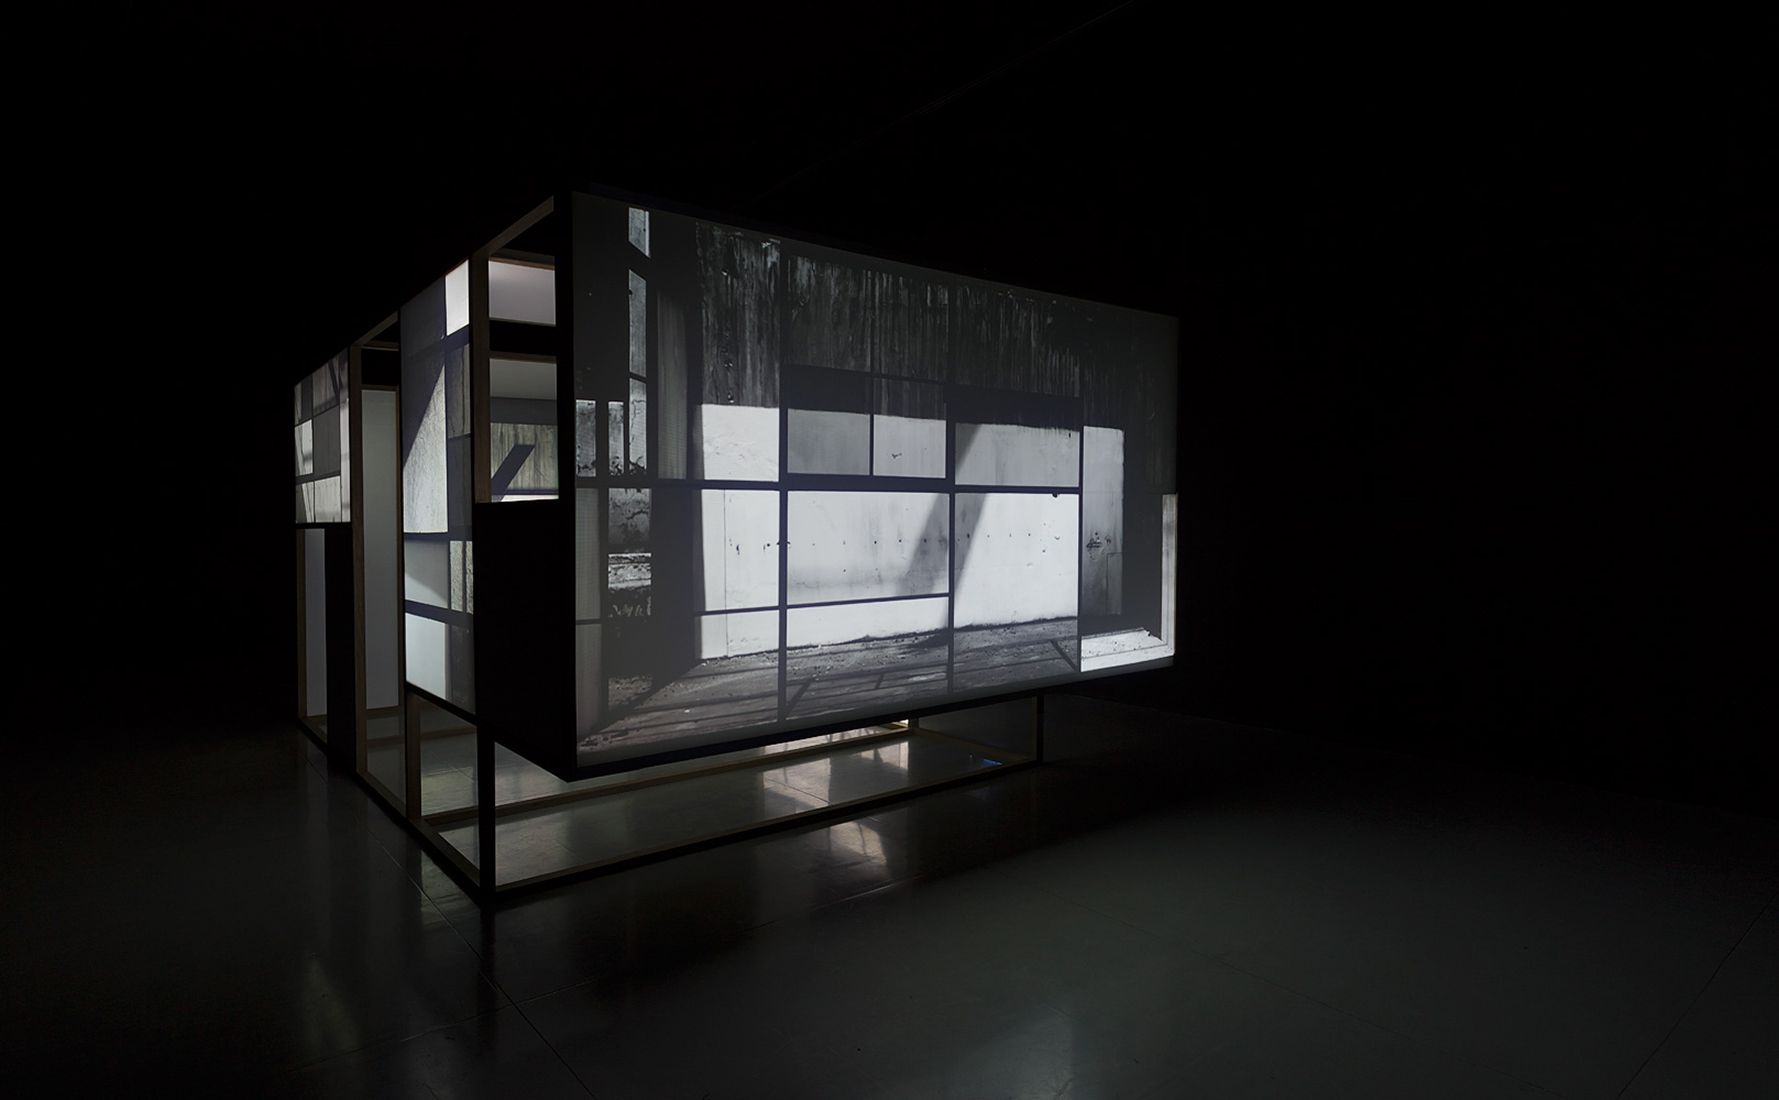    Nada más que las horas , 2013.  Five channel video installation at MAZ Museum. Wood, Formica and polyester screens.300 x 425 x 220 cm. 